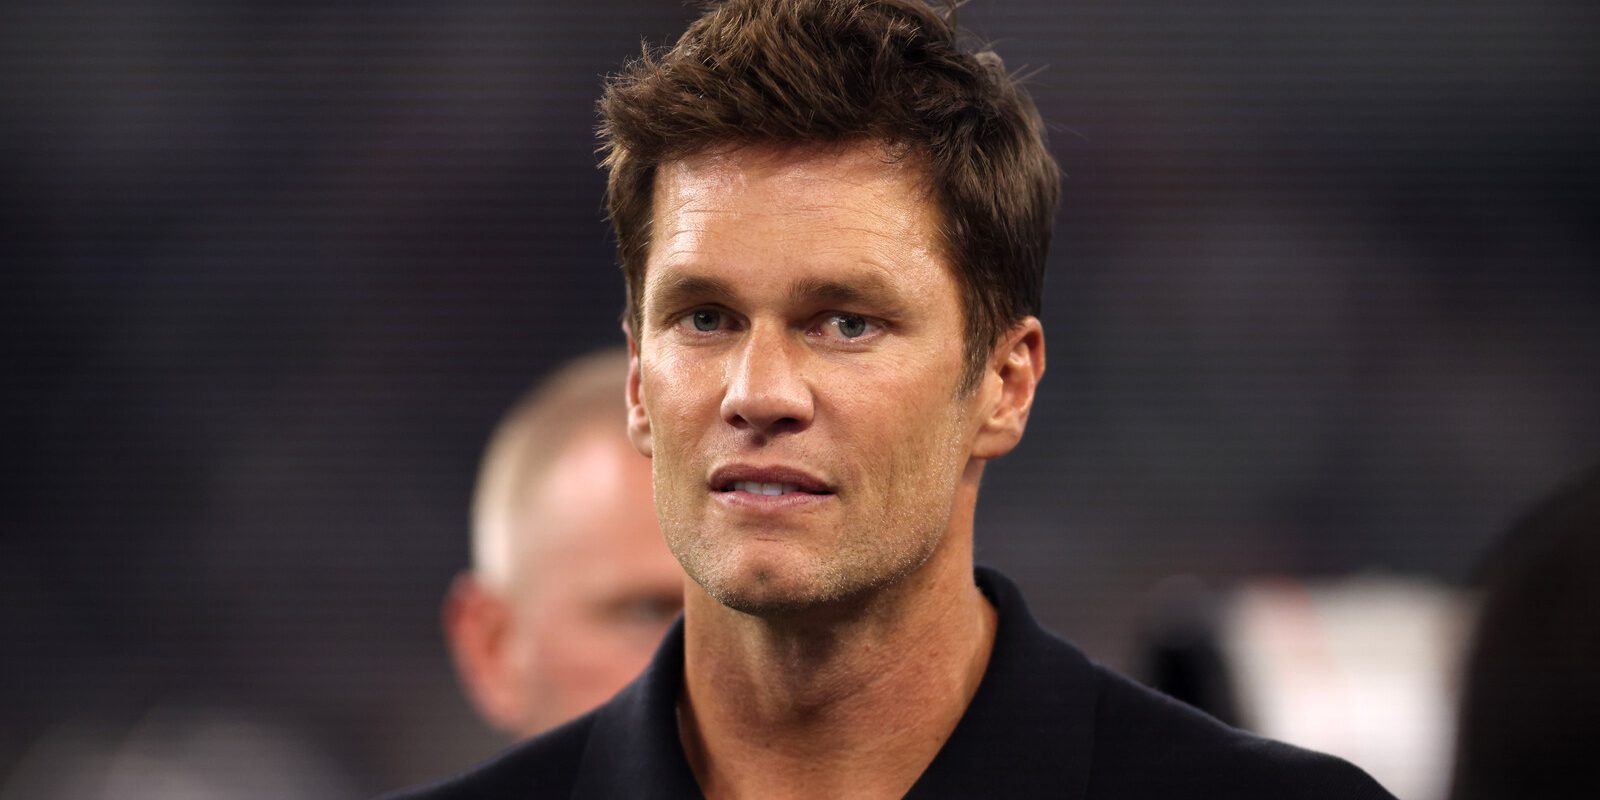 Patriots share awesome audio of Tom Brady’s first NFL conference call after getting drafted